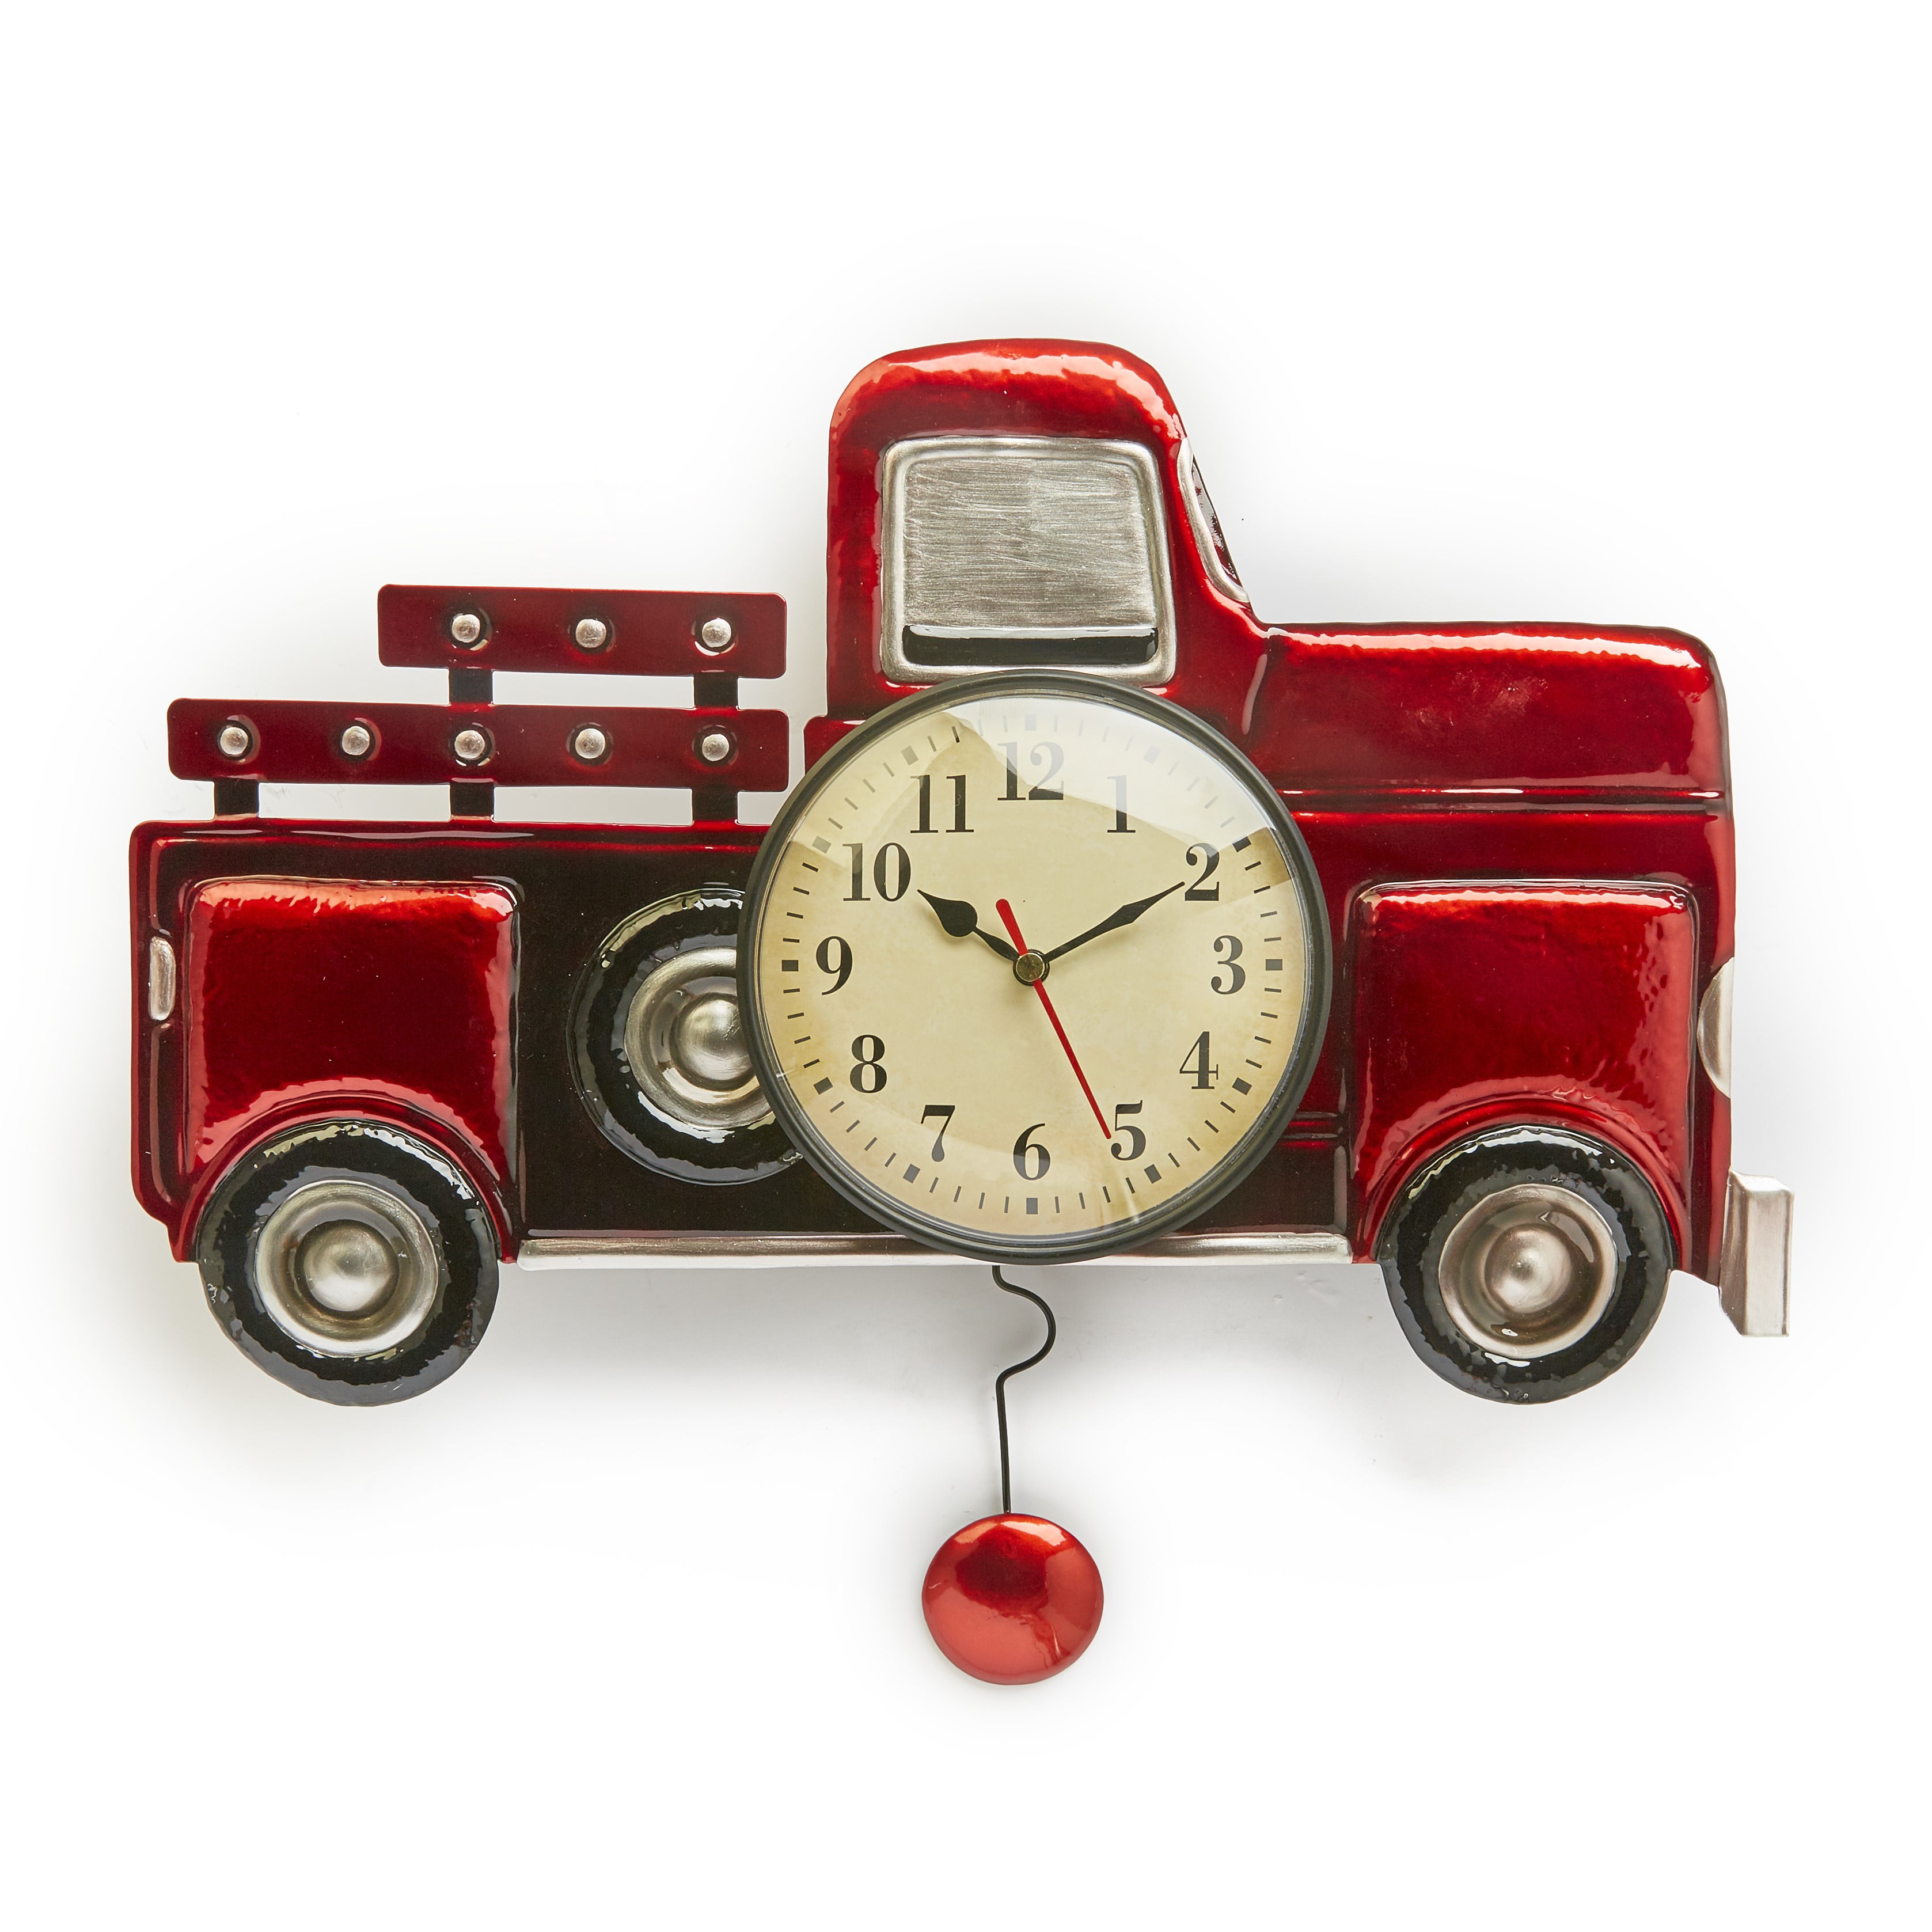 NEW VINTAGE STYLE RETRO RED WALL CLOCK 